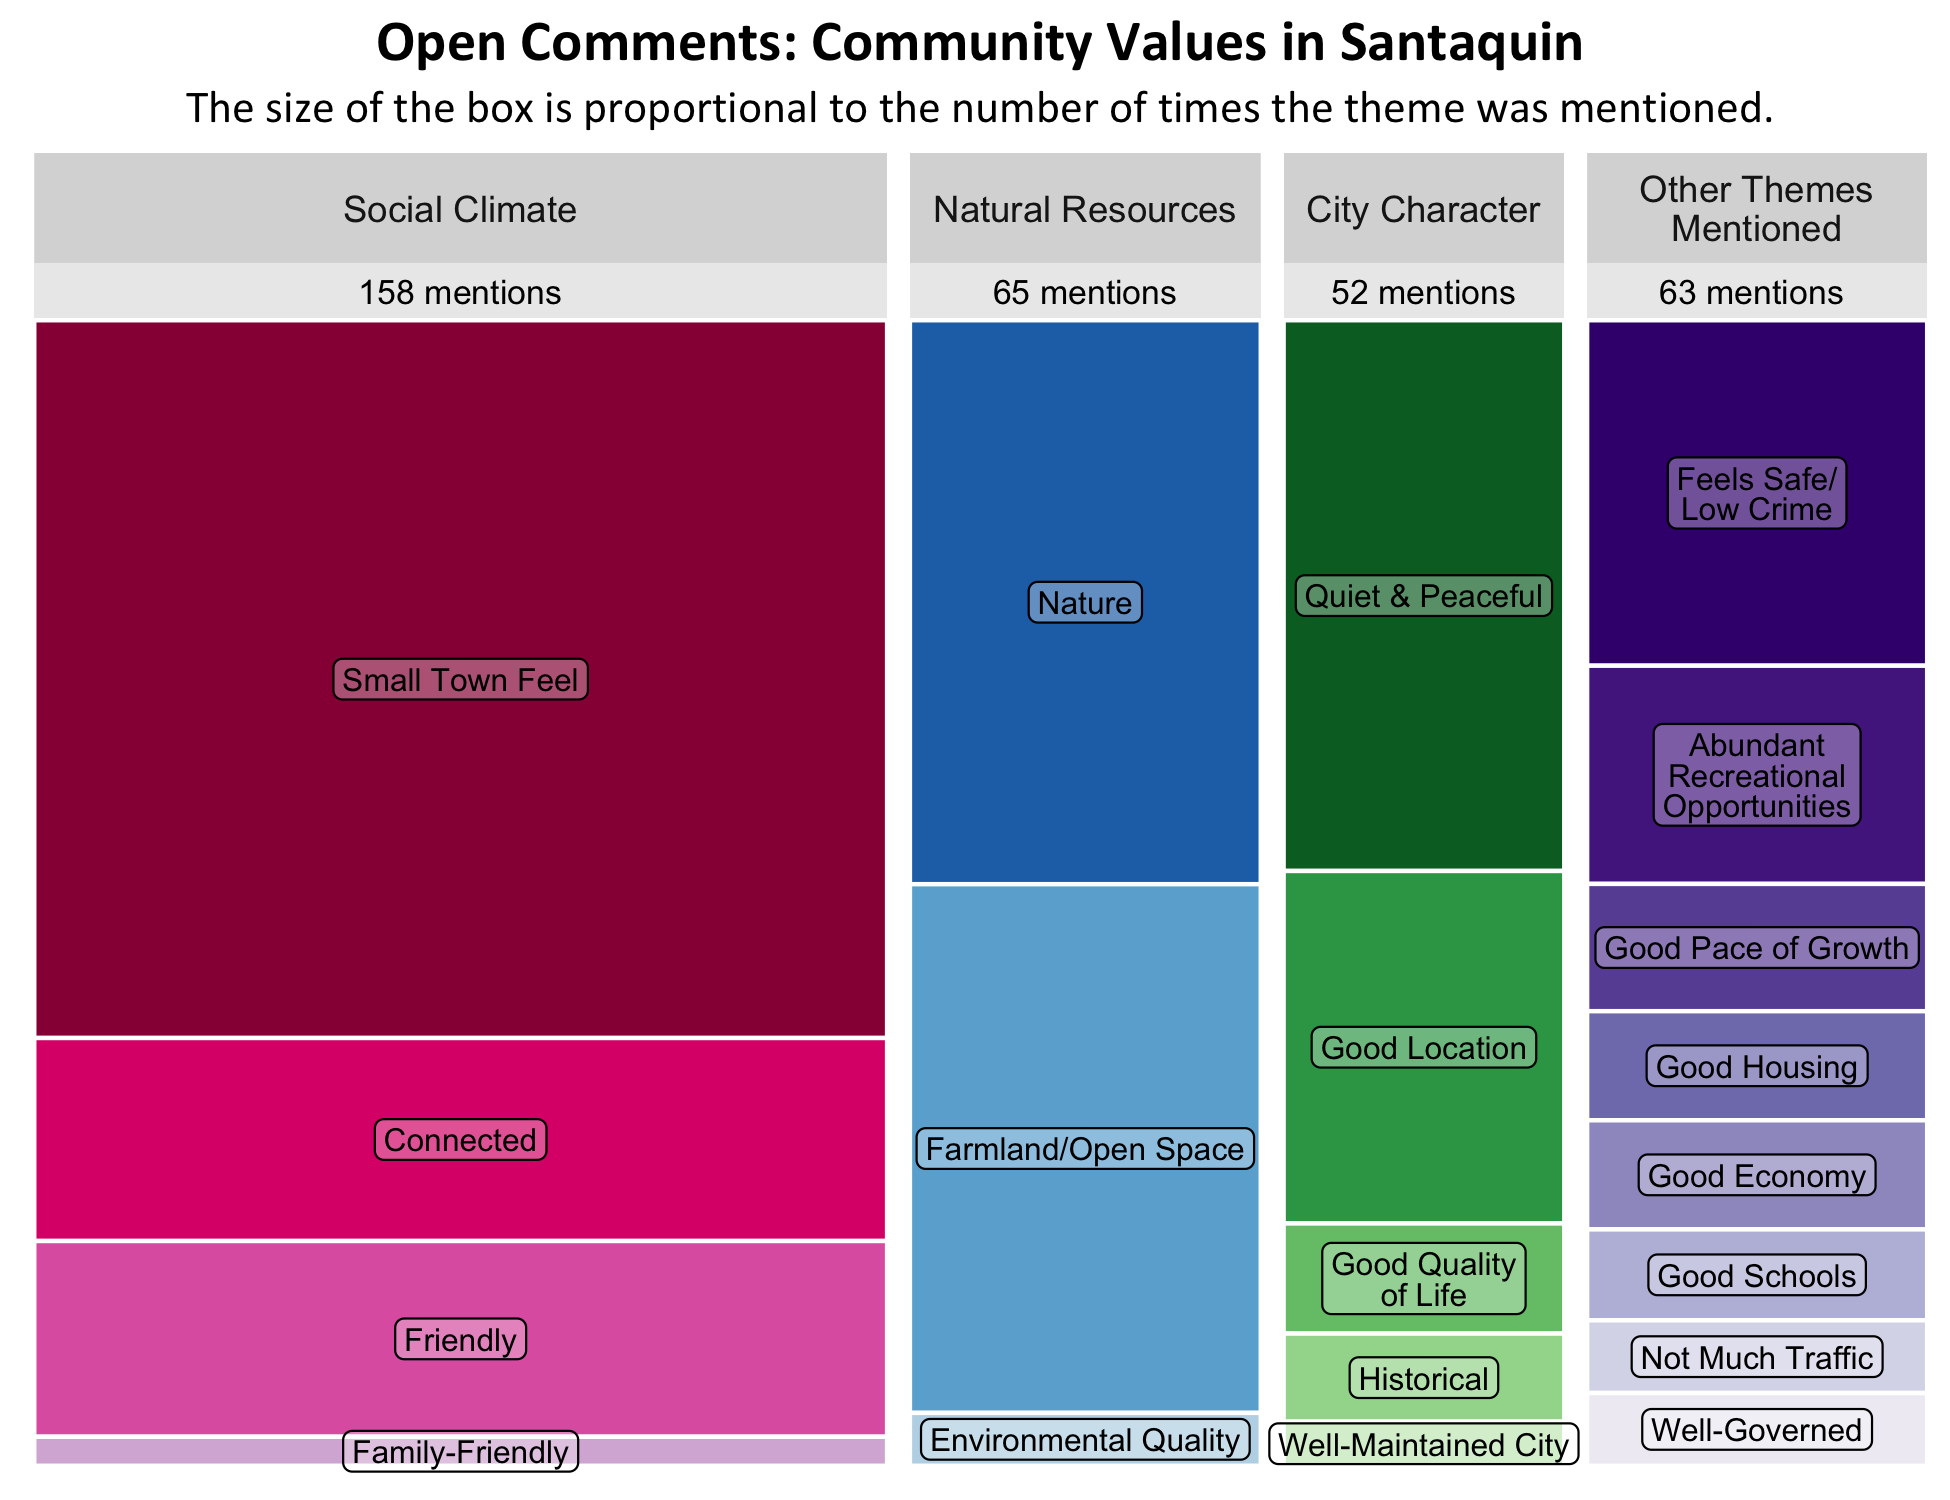 Type: Treemap Chart. Title: Open Comments: Community Values in Santaquin. Subtitle: The size of the box is proportional to the number of times the theme was mentioned. Data –; Category: Social Climate- 158 mentions, boxes largest to smallest include Small Town Feel, connected, Friendly, Family-Friendly; Category: Natural Resources- 65 Mentions, boxes largest to smallest include Nature, Farmland/Open Space, Environmental Quality. City Character- 52 mentions, boxes largest to smallest include Quiet/Peaceful, Good Location, Good Quality of Life, Historical, Well-Maintained City; Category: Other Themes Mentioned- 63 mentions, boxes largest to smallest Includes Feels Safe/Low Crime, Abundant Recreational Opportunities, Good pace of Growth, Good Housings, Good Economy, Good Schools, Not Much Traffic, Well-Governed. 